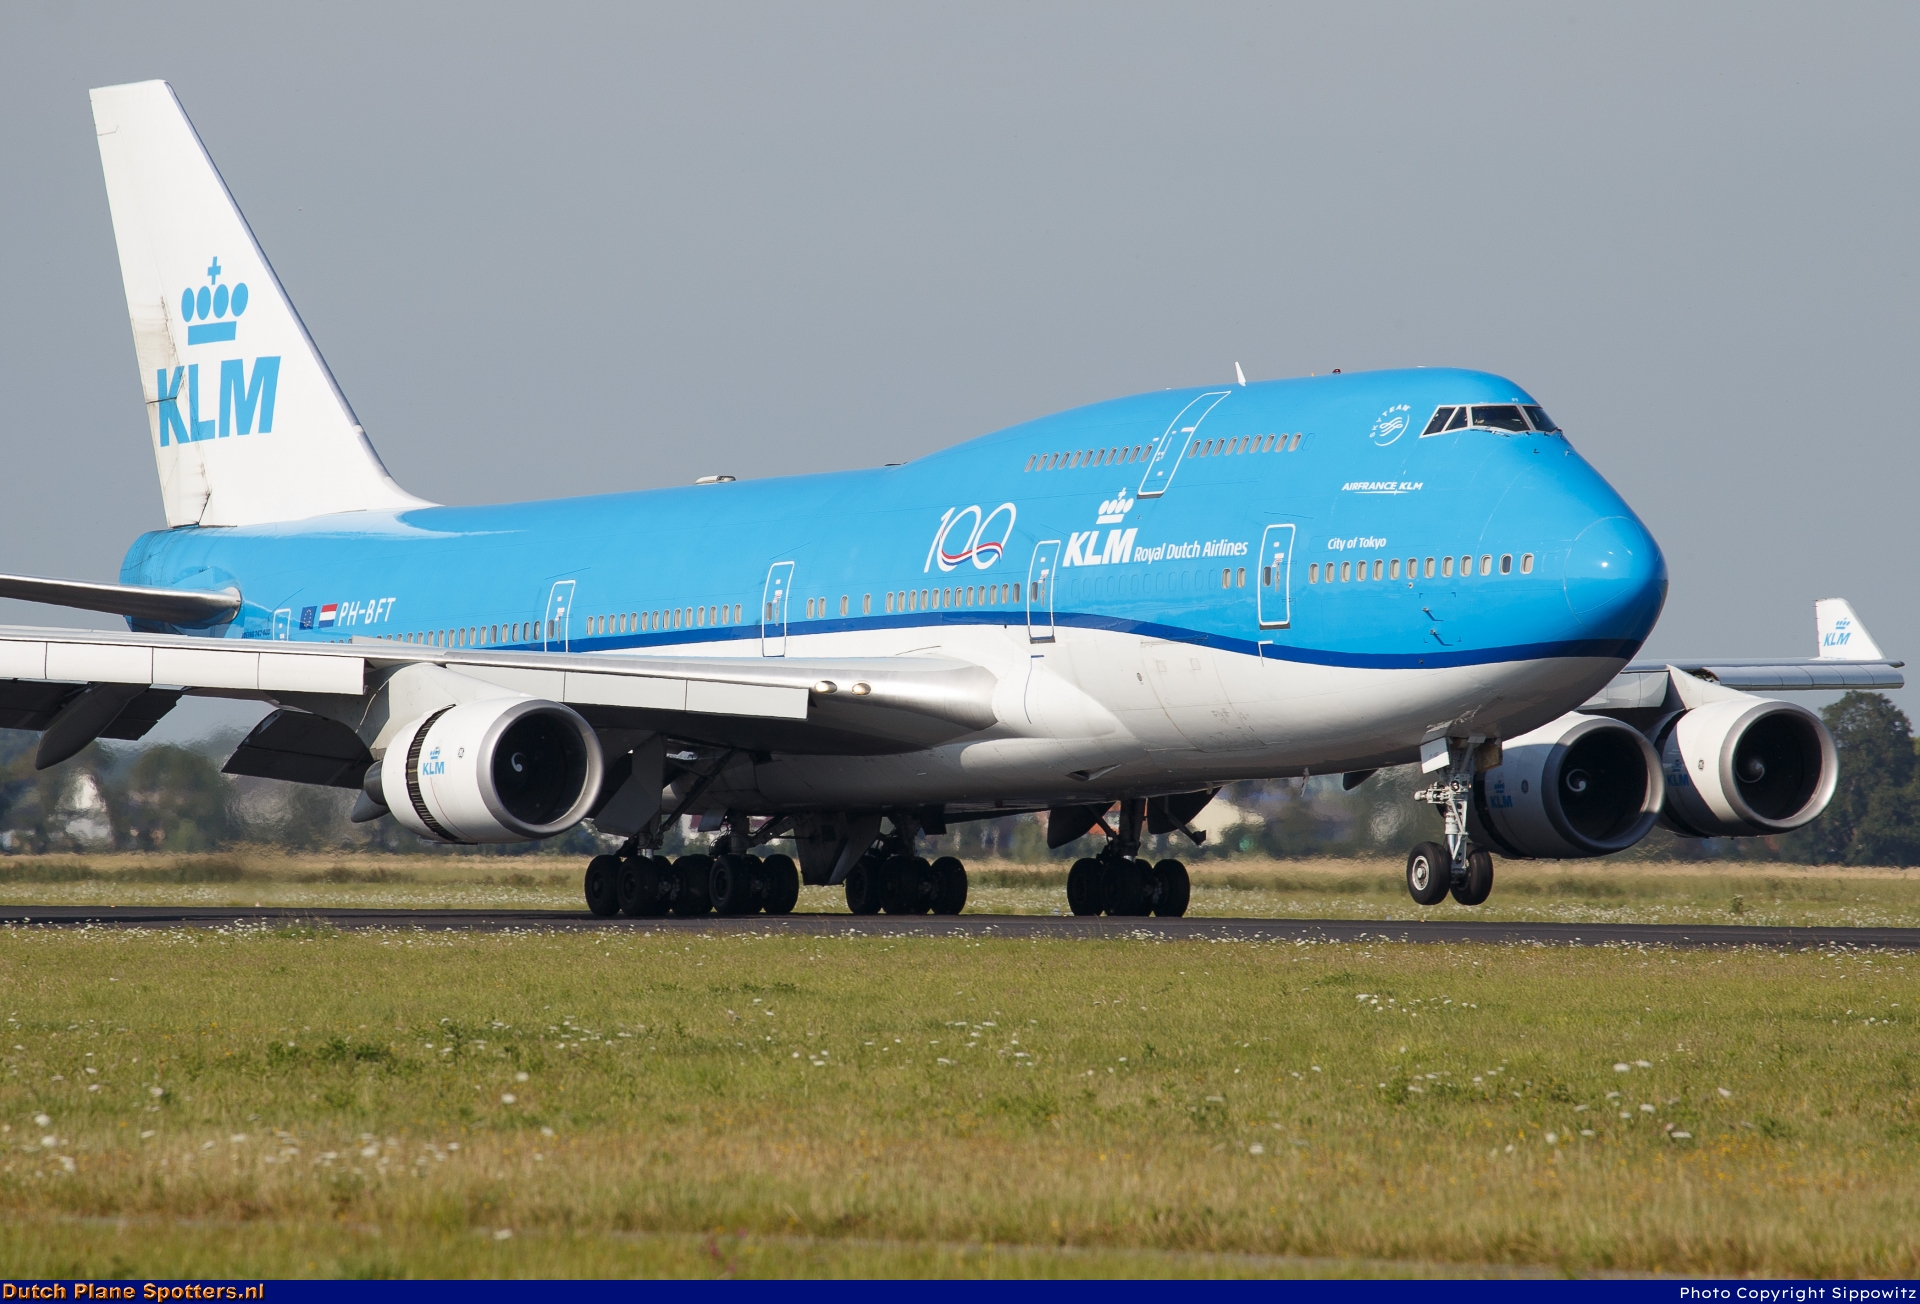 PH-BFT Boeing 747-400 KLM Royal Dutch Airlines by Sippowitz